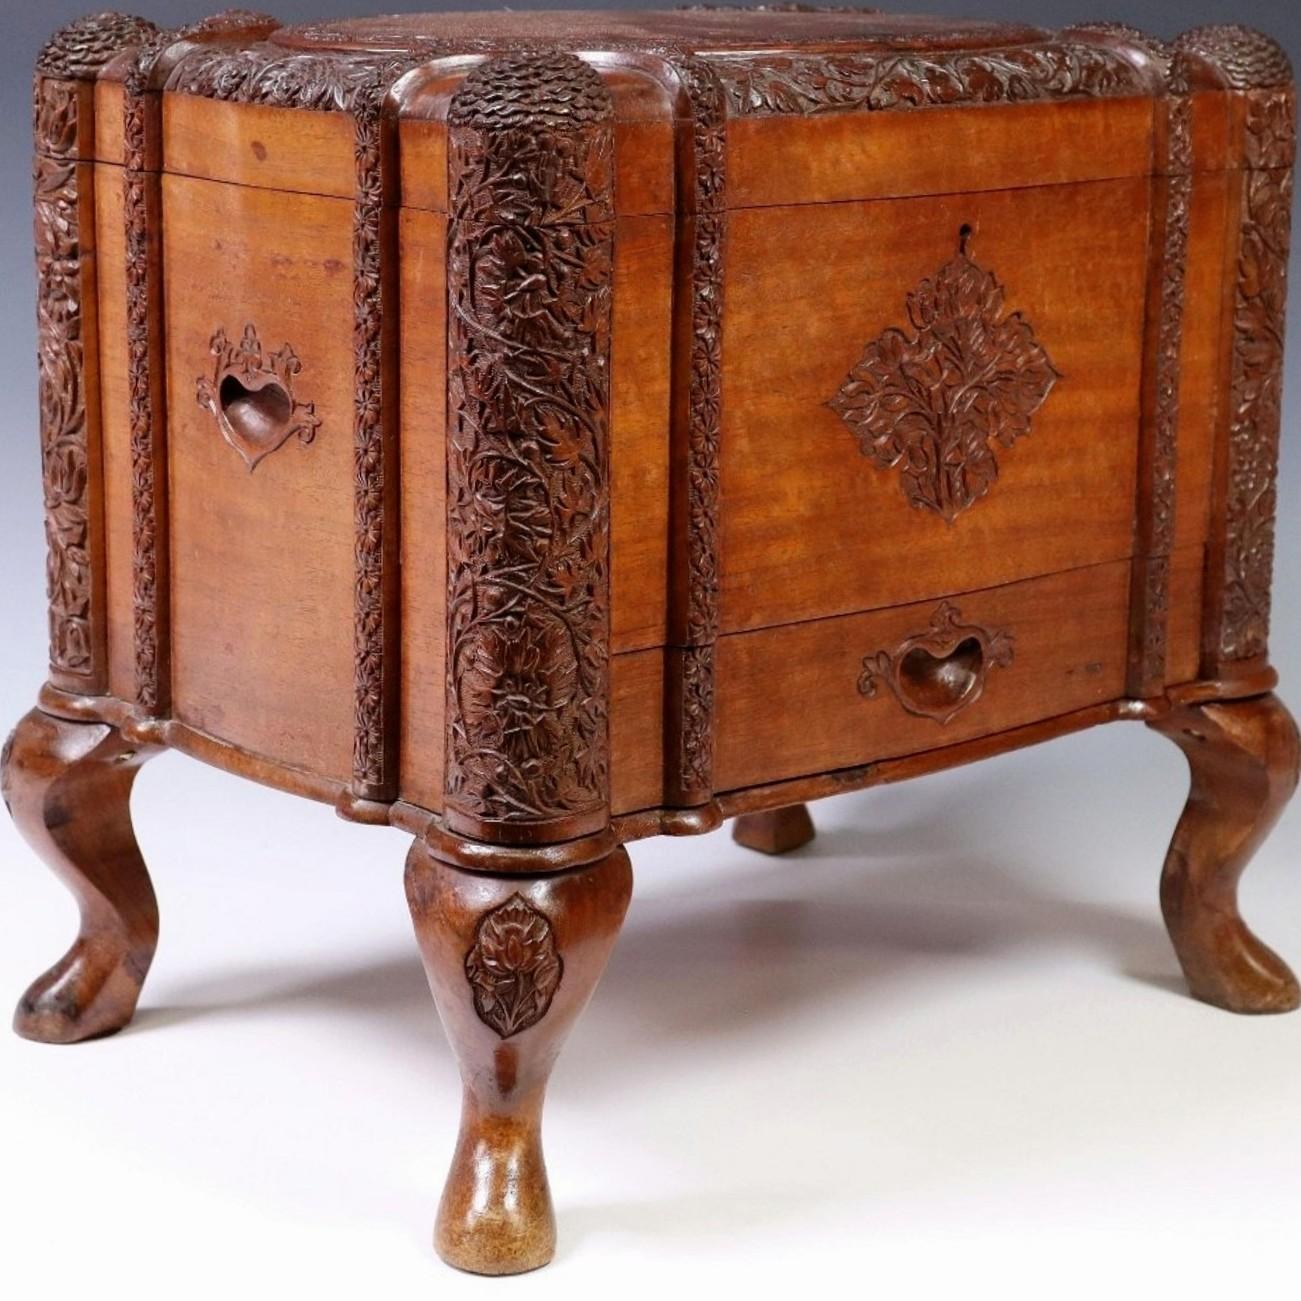 Large Antique South Asian Colonial Carved Camphor Wood Table Box Jewelry Casket For Sale 4